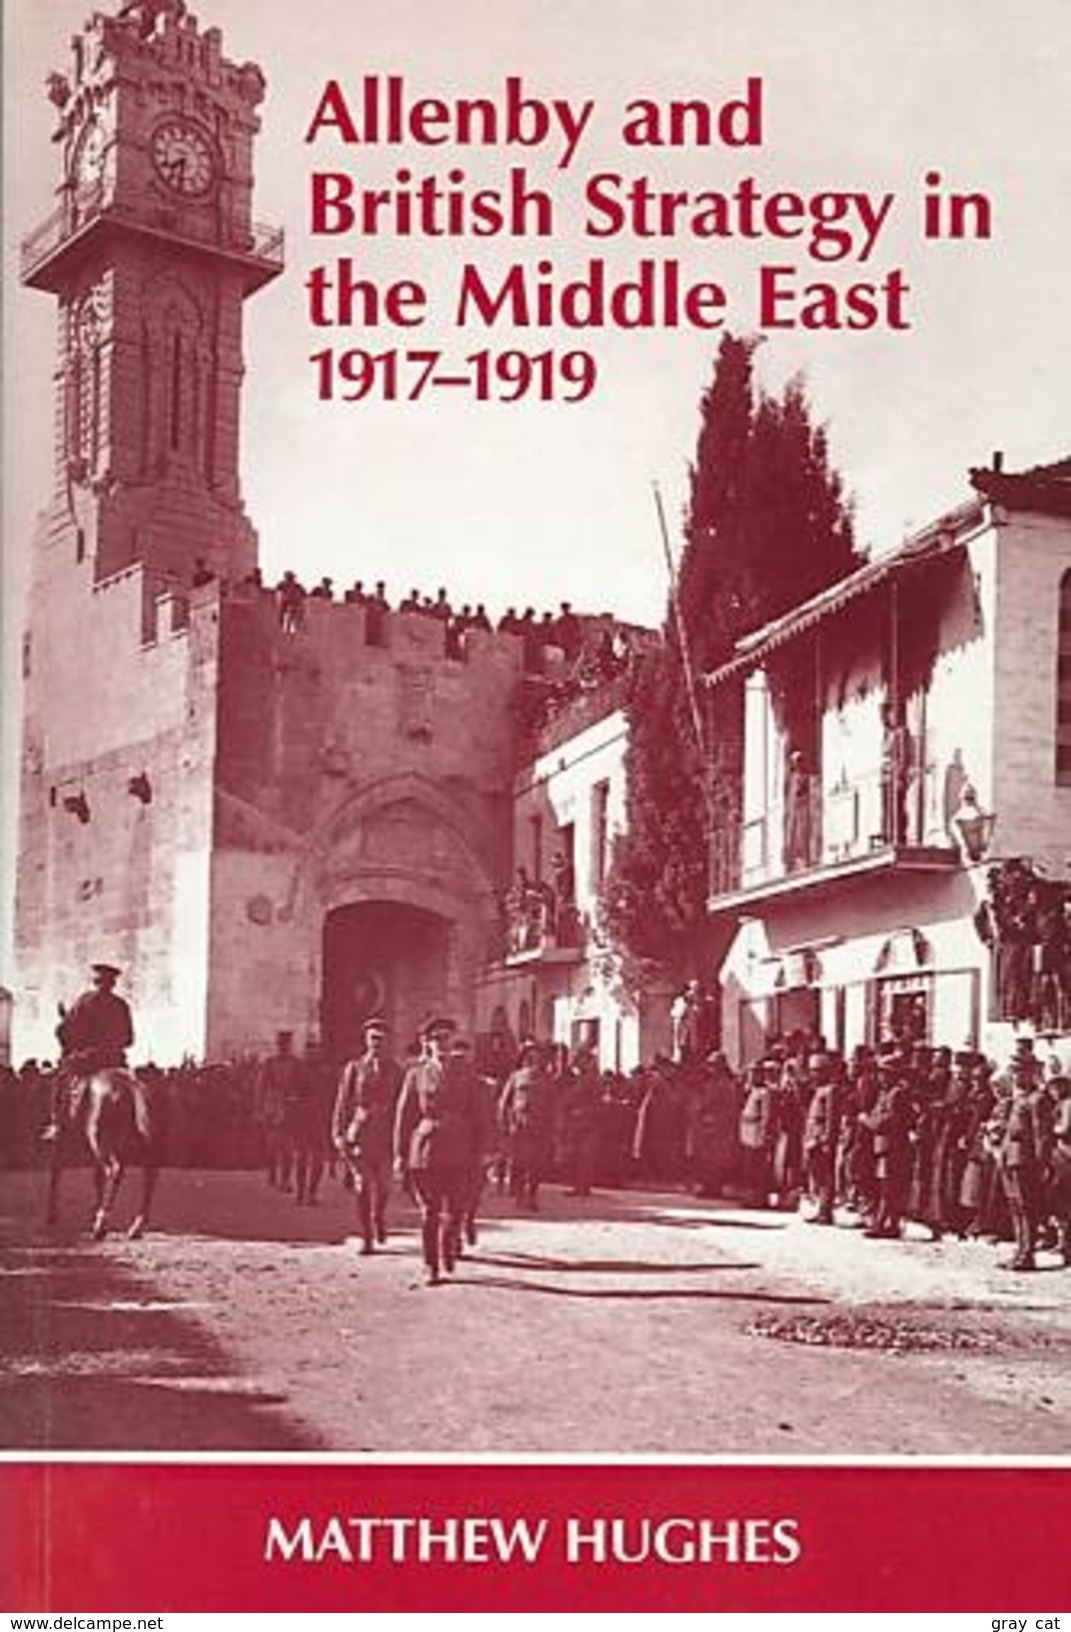 Allenby And British Strategy In The Middle East, 1917-1919 By Matthew Hughes (ISBN 9780714649207) - Midden-Oosten